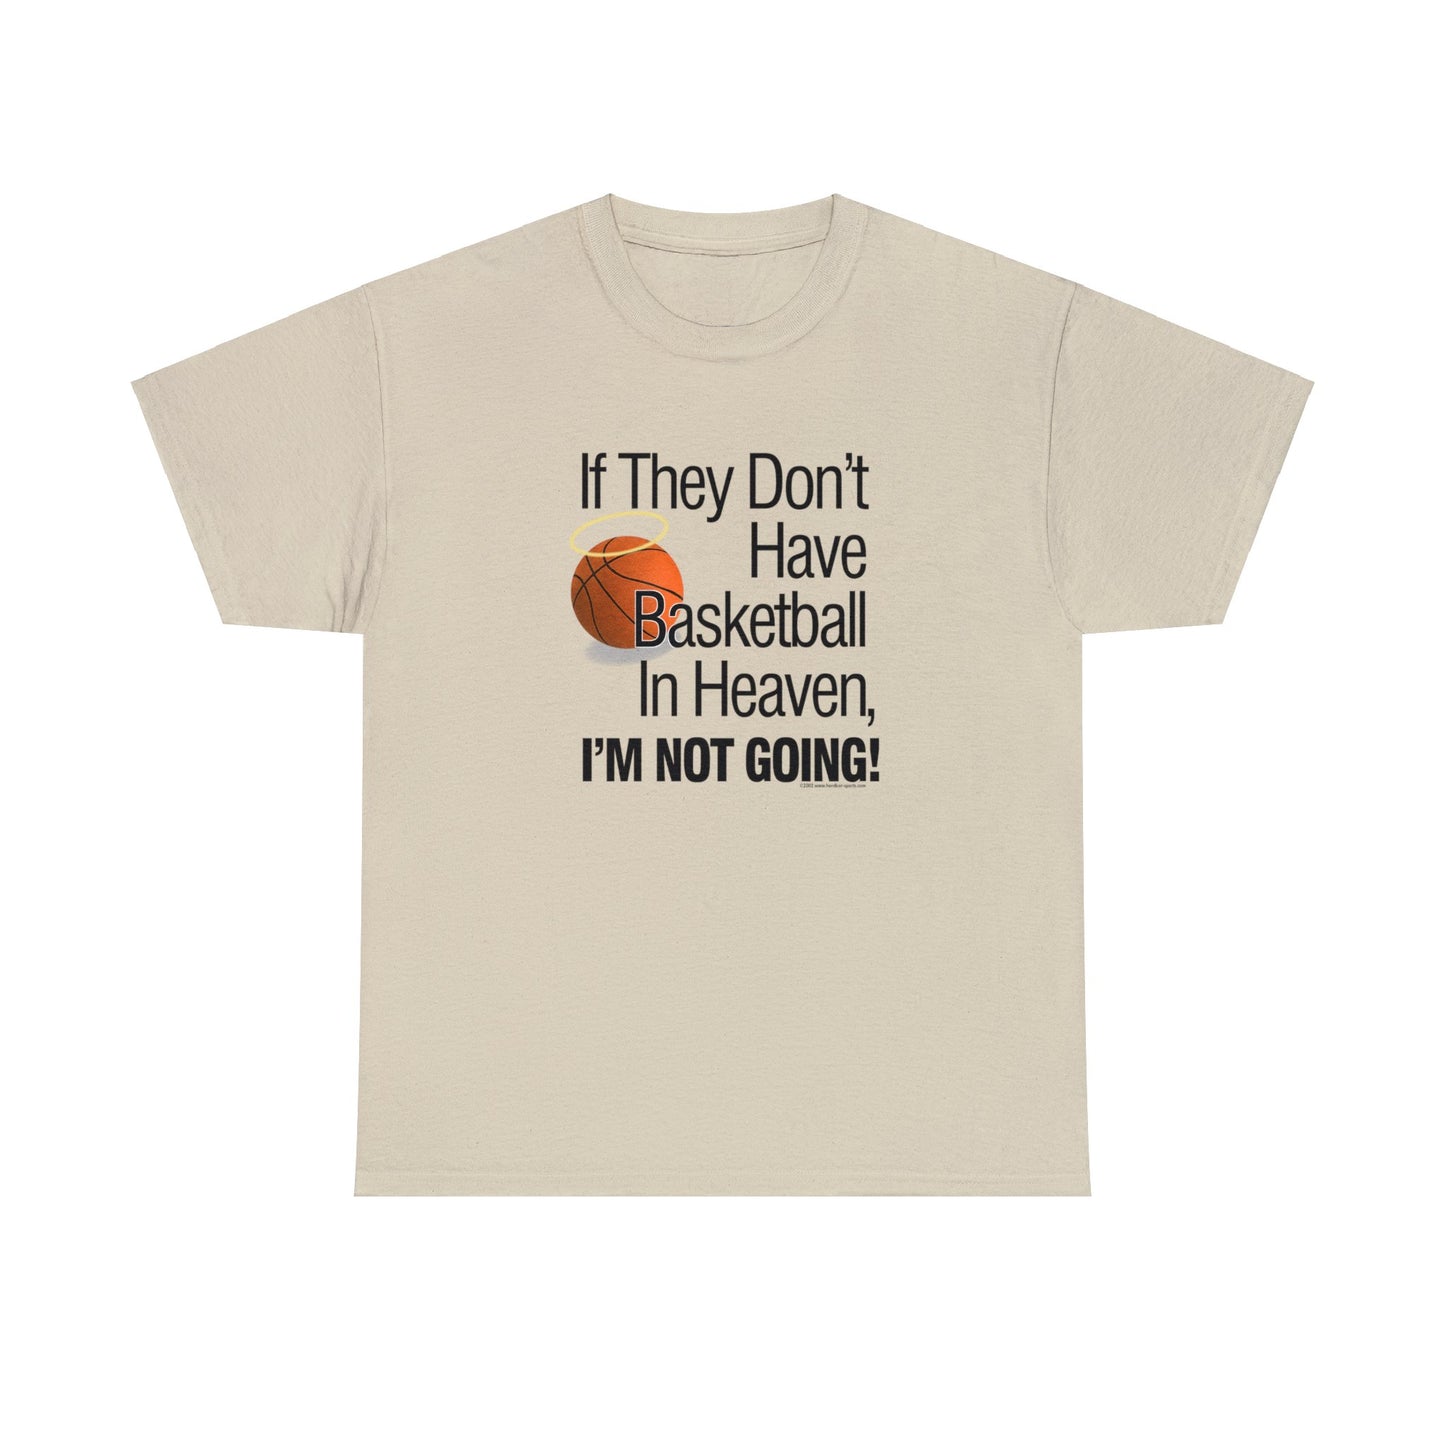 If They Don't Have Basketball in Heaven, I'm Not Going, Basketball T-Shirt, Funny Basketball T, Basketball Gift, Basketball Team Gift,